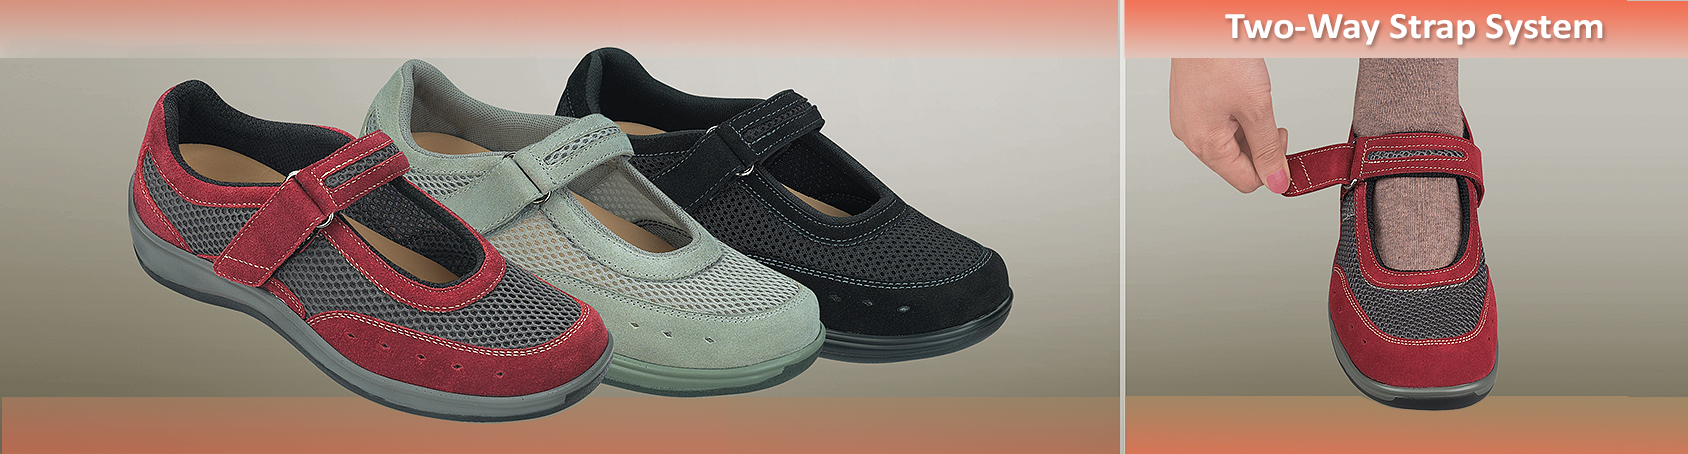 womens orthotic sneakers